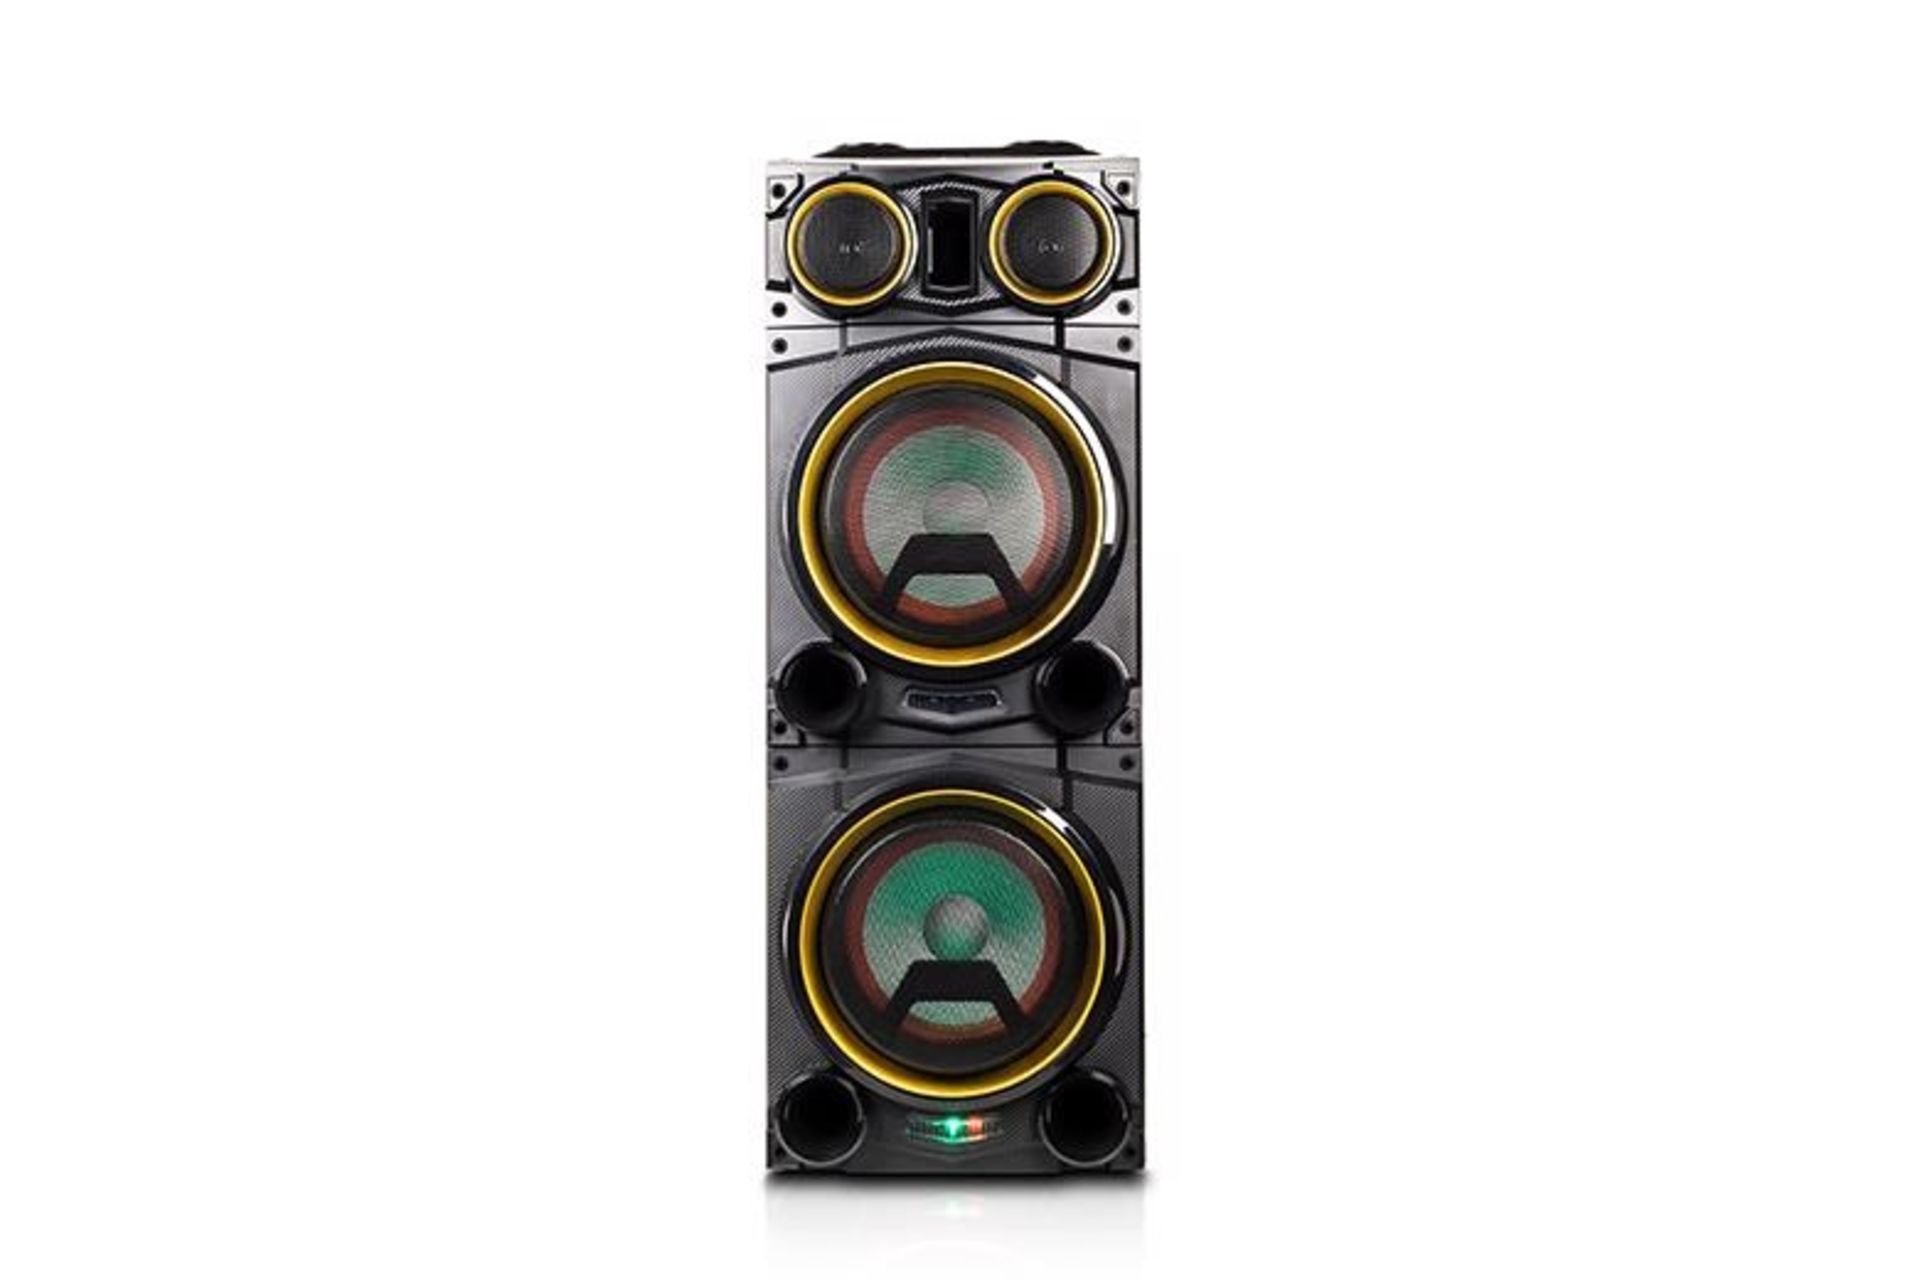 Six boxed unused Tibo X-Treme 300 stereo speaker systems, manufacturers model number XTREME 300,